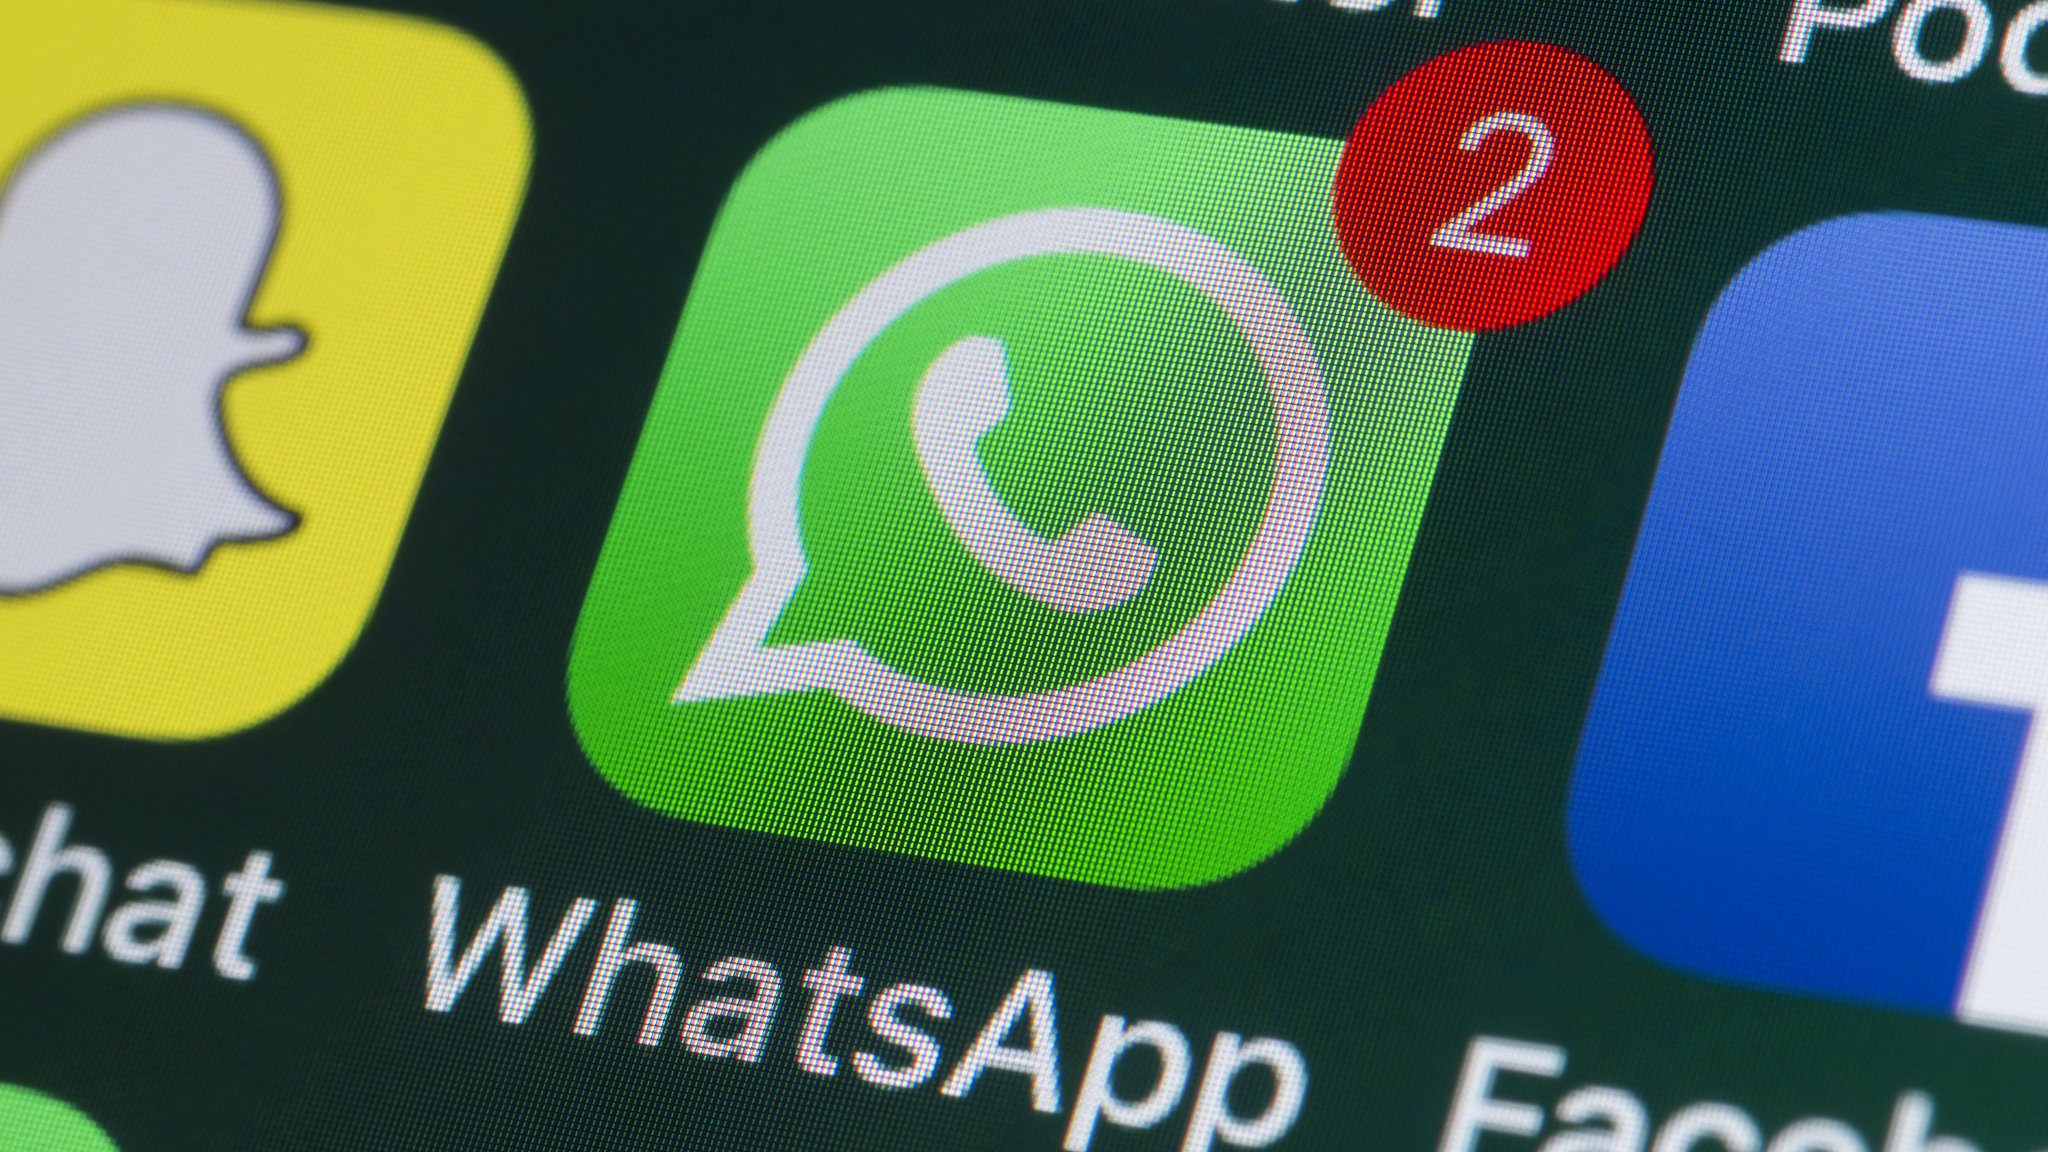 WhatsApp introduces new update